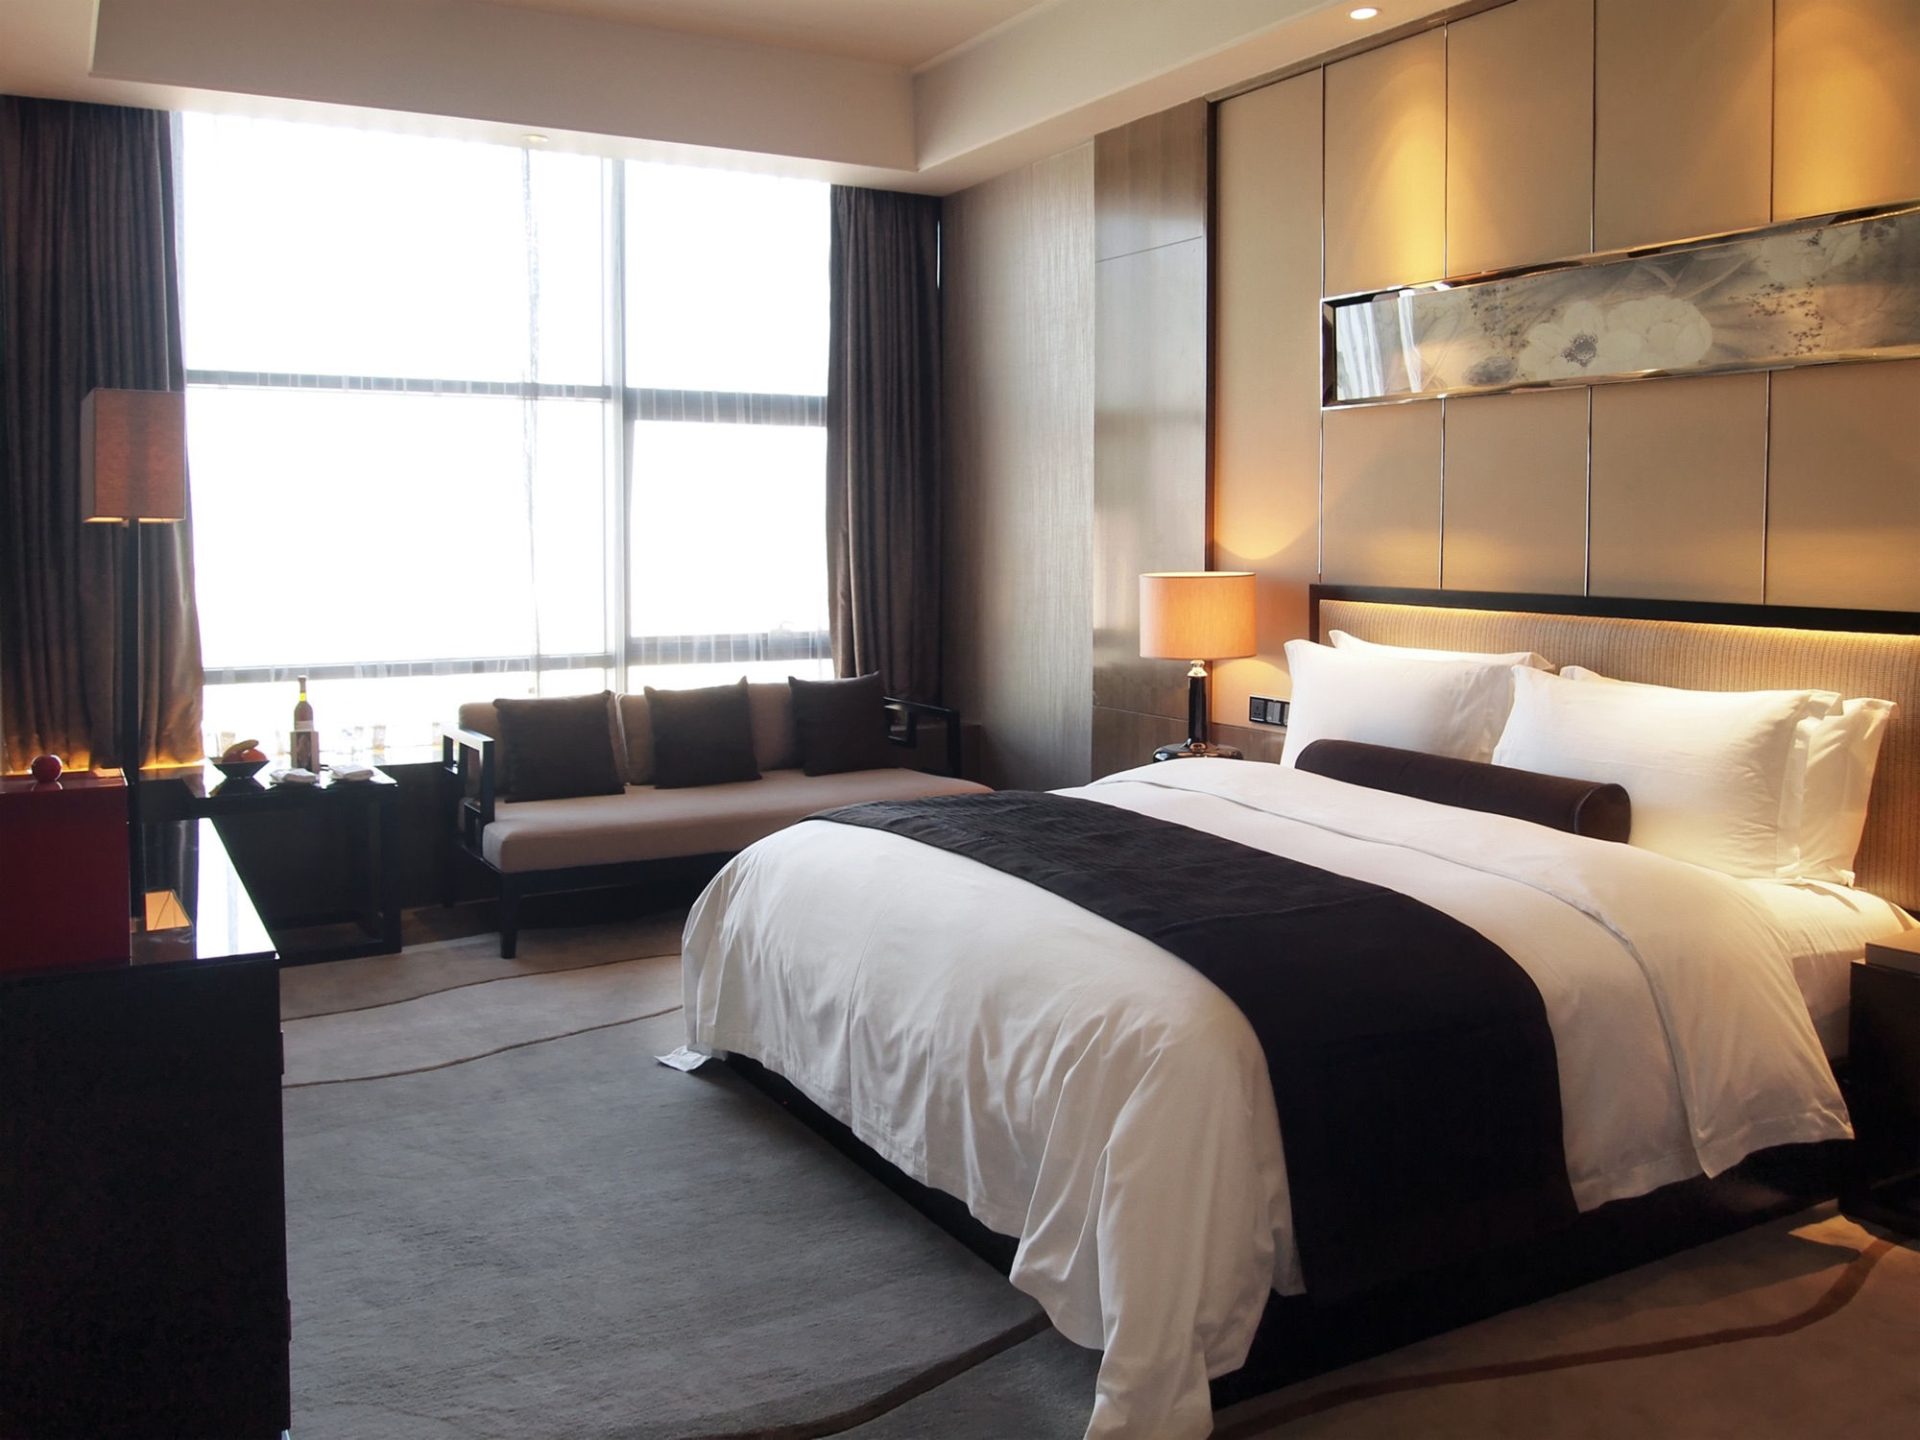 Luxurious, cozy room in a boutique hotel with elegant decor and comfortable amenities.